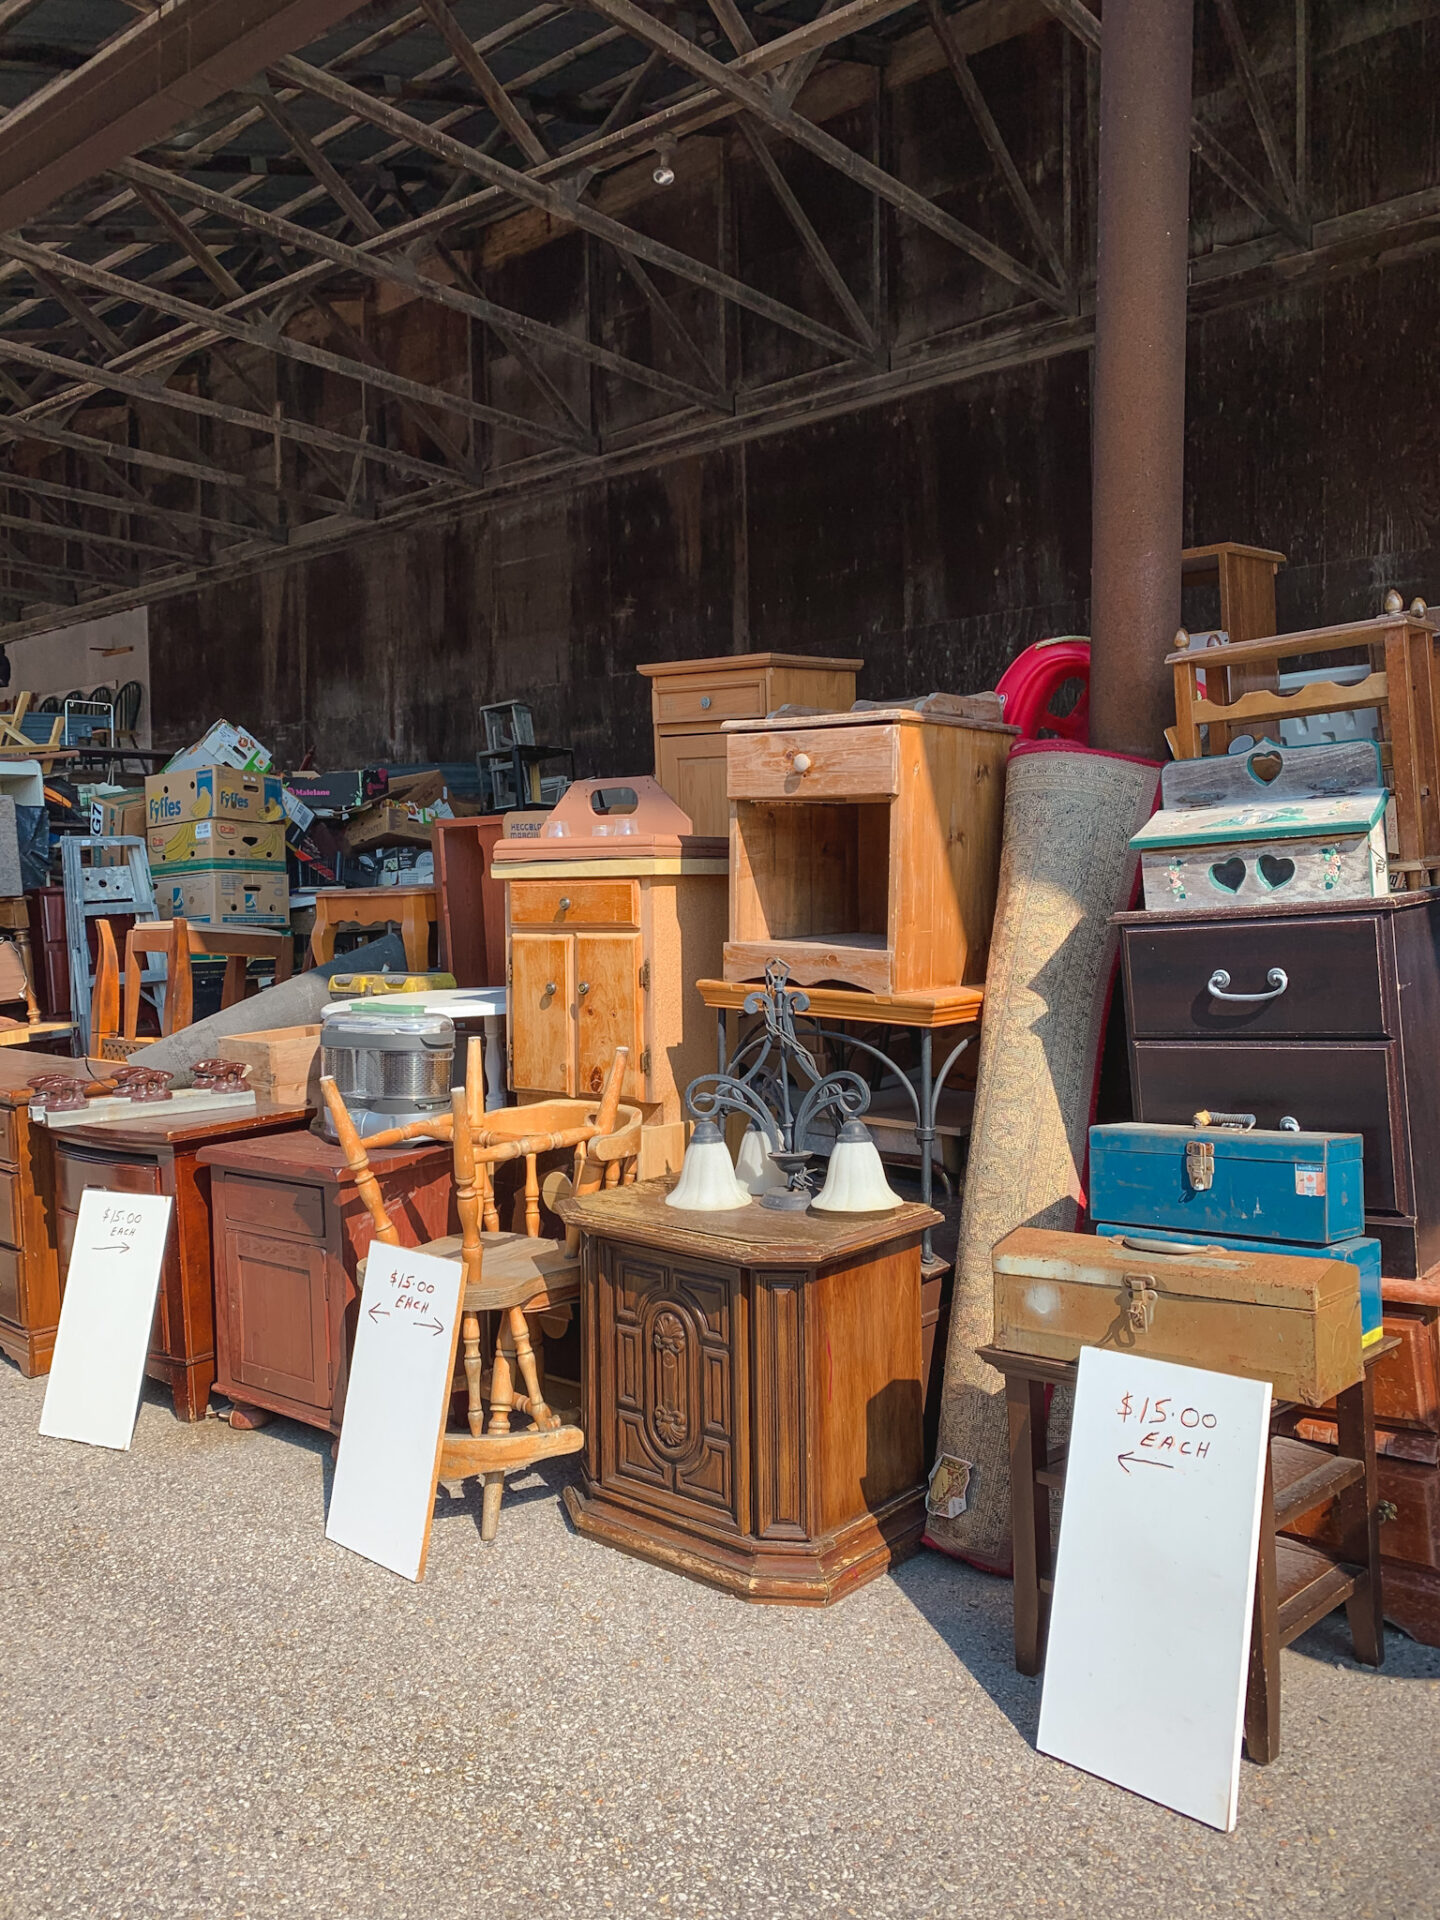 Vintage furniture at Courtice Flea Market in Courtice, Ontario